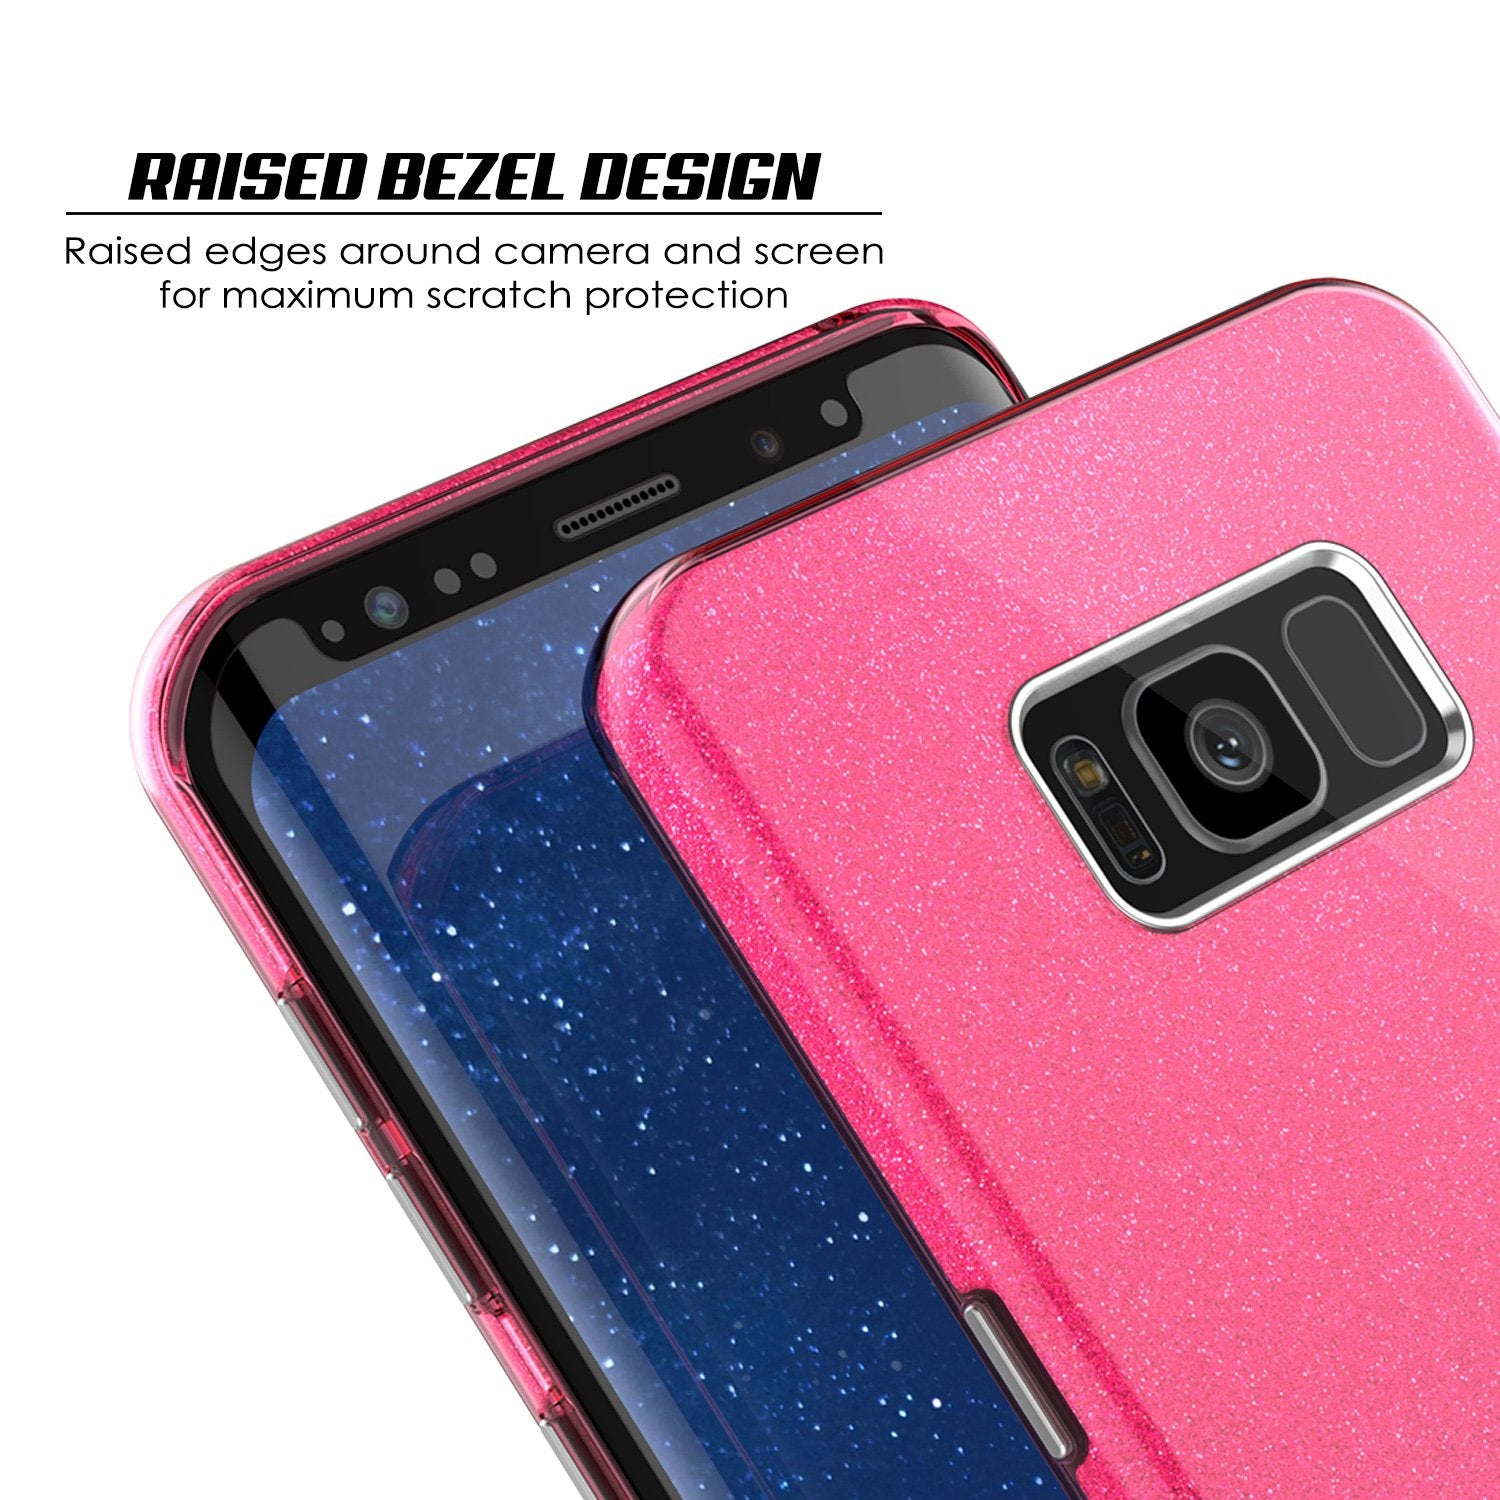 Galaxy S8 Plus Case, Punkcase Galactic 2.0 Series Ultra Slim Protective Armor TPU Cover [Pink] - PunkCase NZ